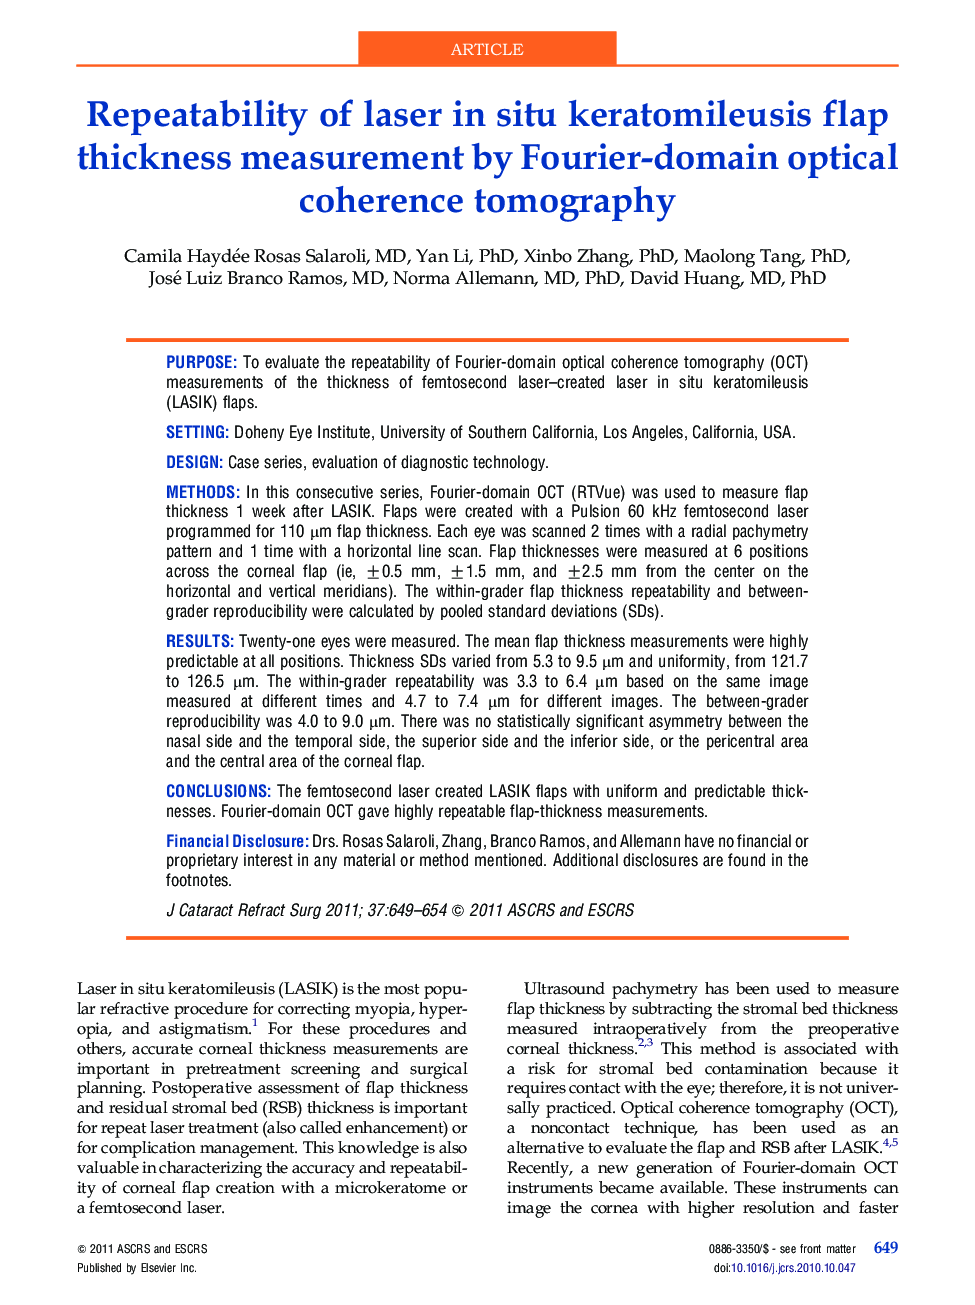 Repeatability of laser in situ keratomileusis flap thickness measurement by Fourier-domain optical coherence tomography